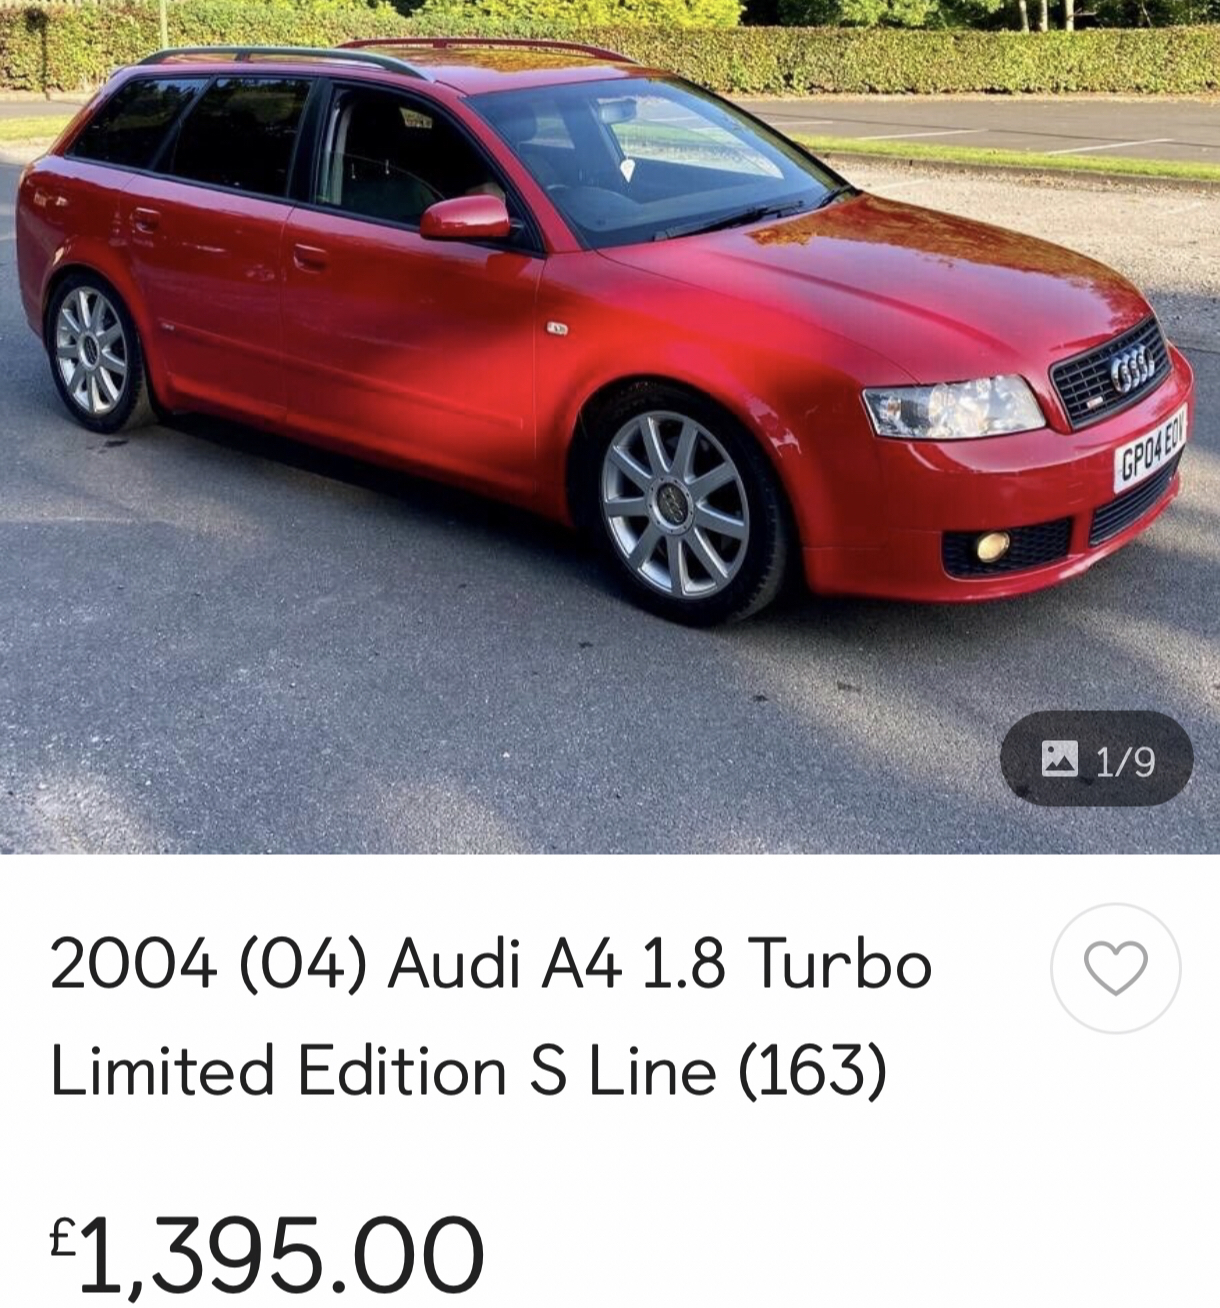 Wanted - A4 B6 Avant 1.8T 2004 Limited Edition in red | Audi-Sport.net